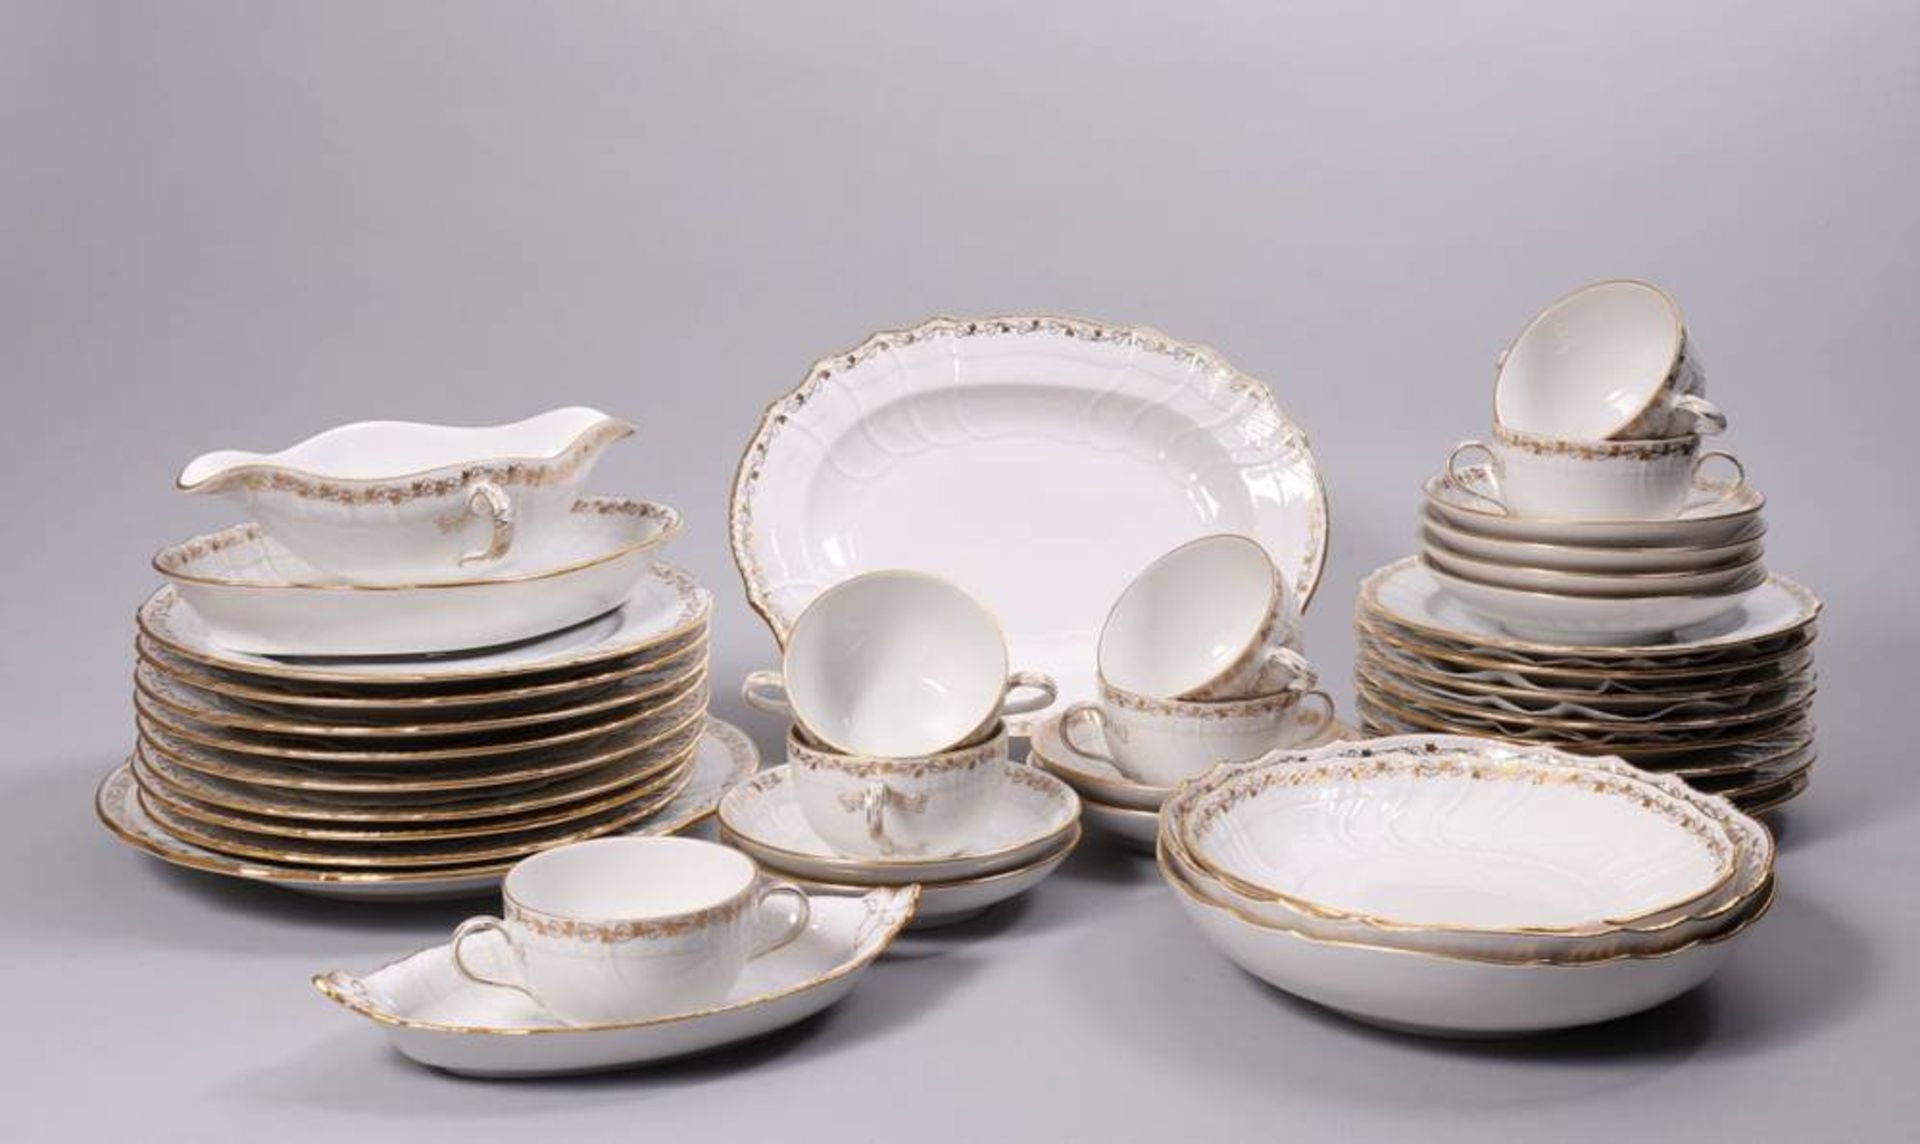 Dinner-service fr 8 PersonsKPM Berlin, Neuozier with gold vine decoration, 38 pcs, small oval